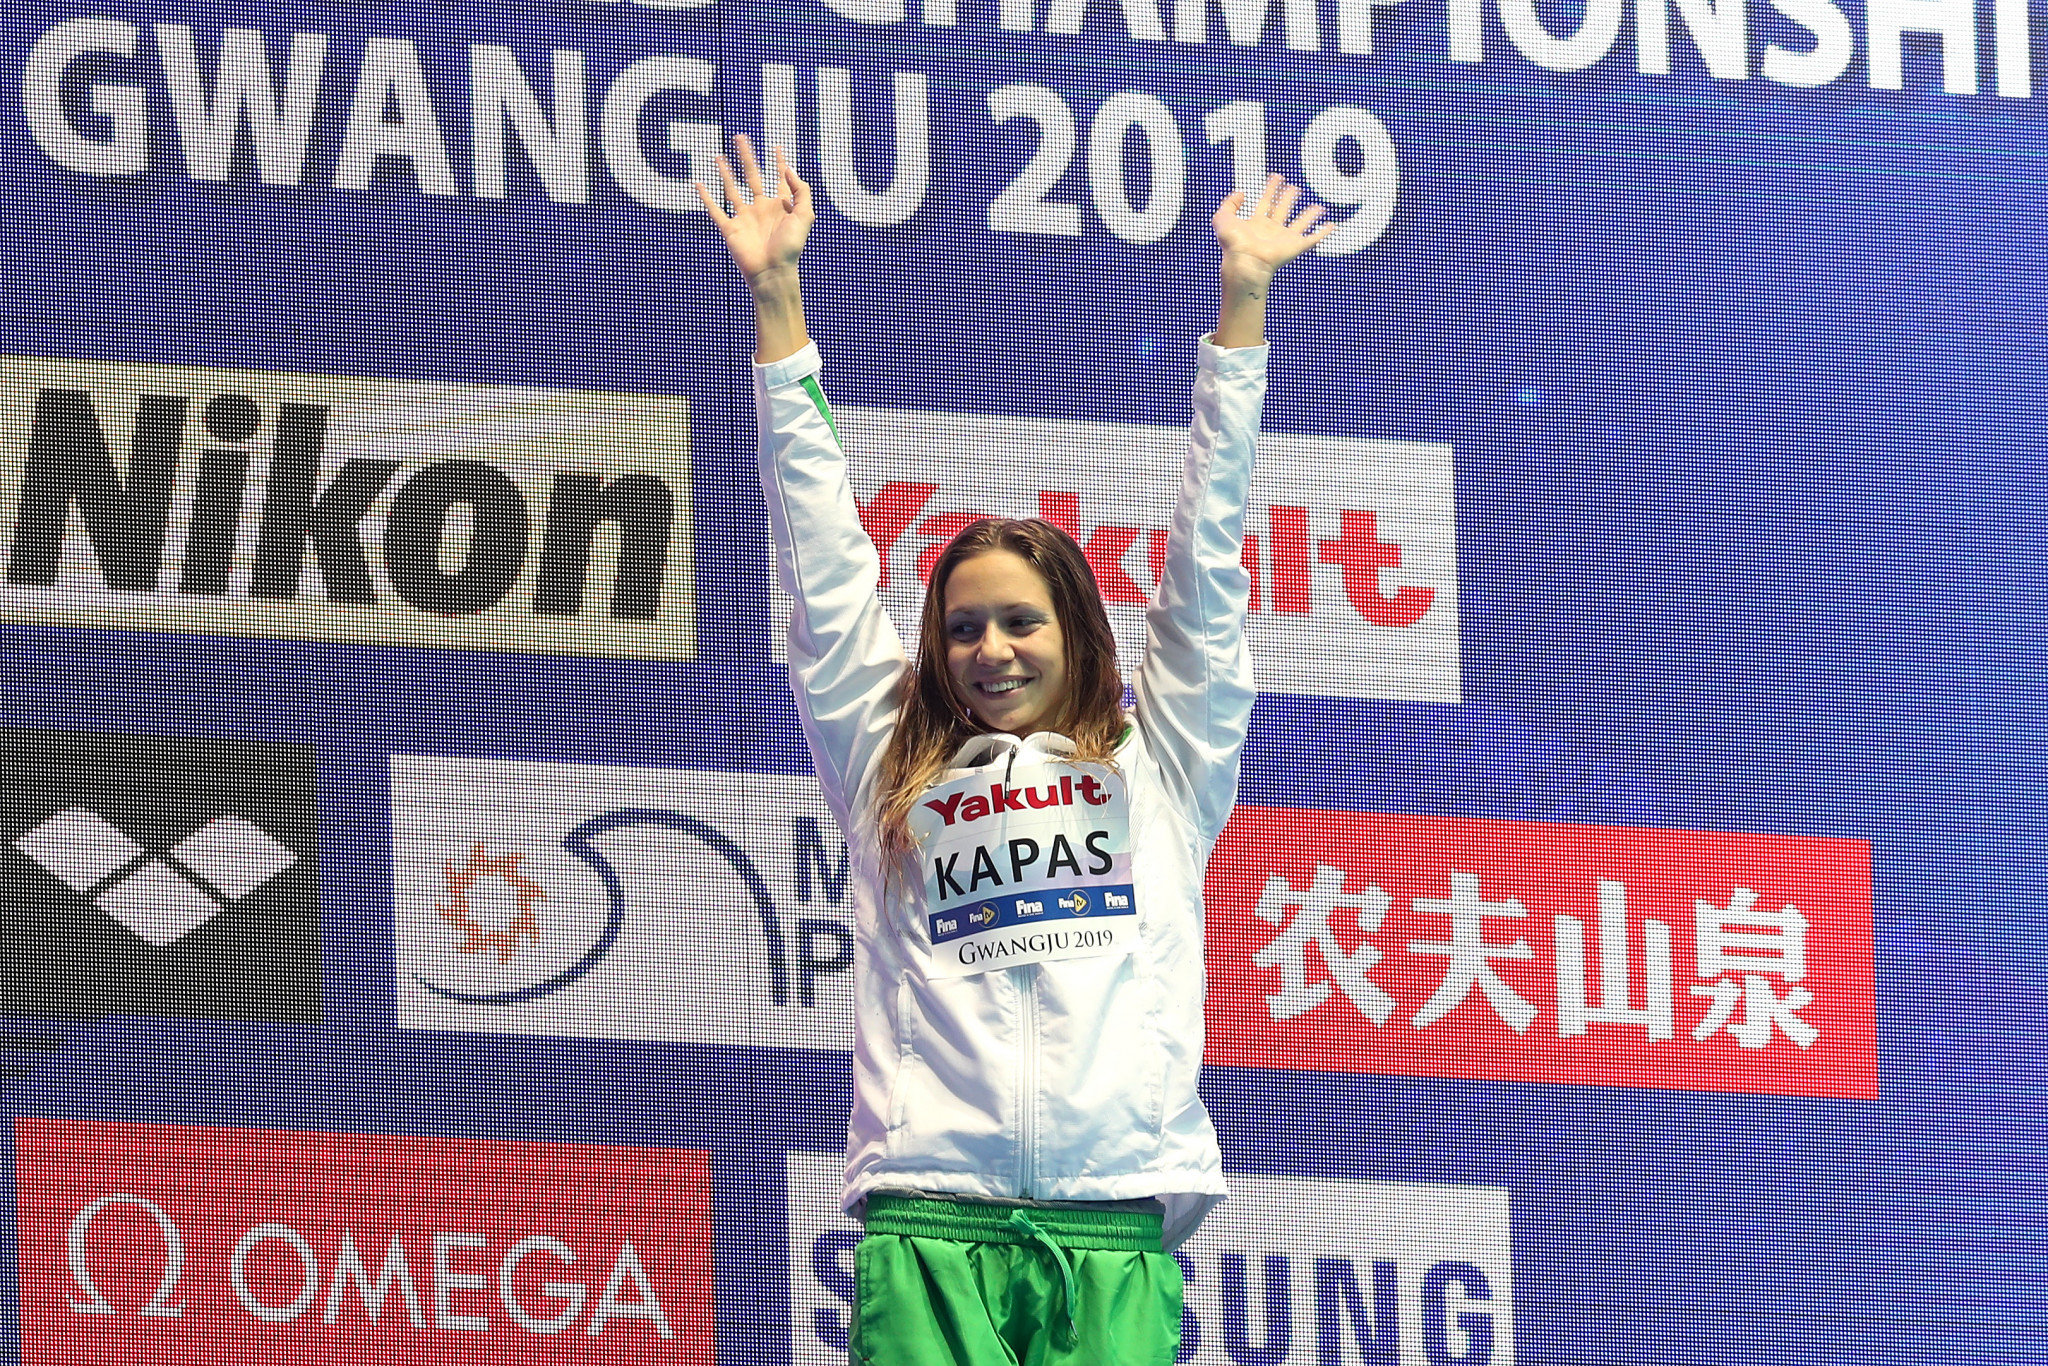 World champion ​Boglárka Kapás​ is among nine of the Hungarian national swimming team to test positive for coronavirus ©Getty Images 